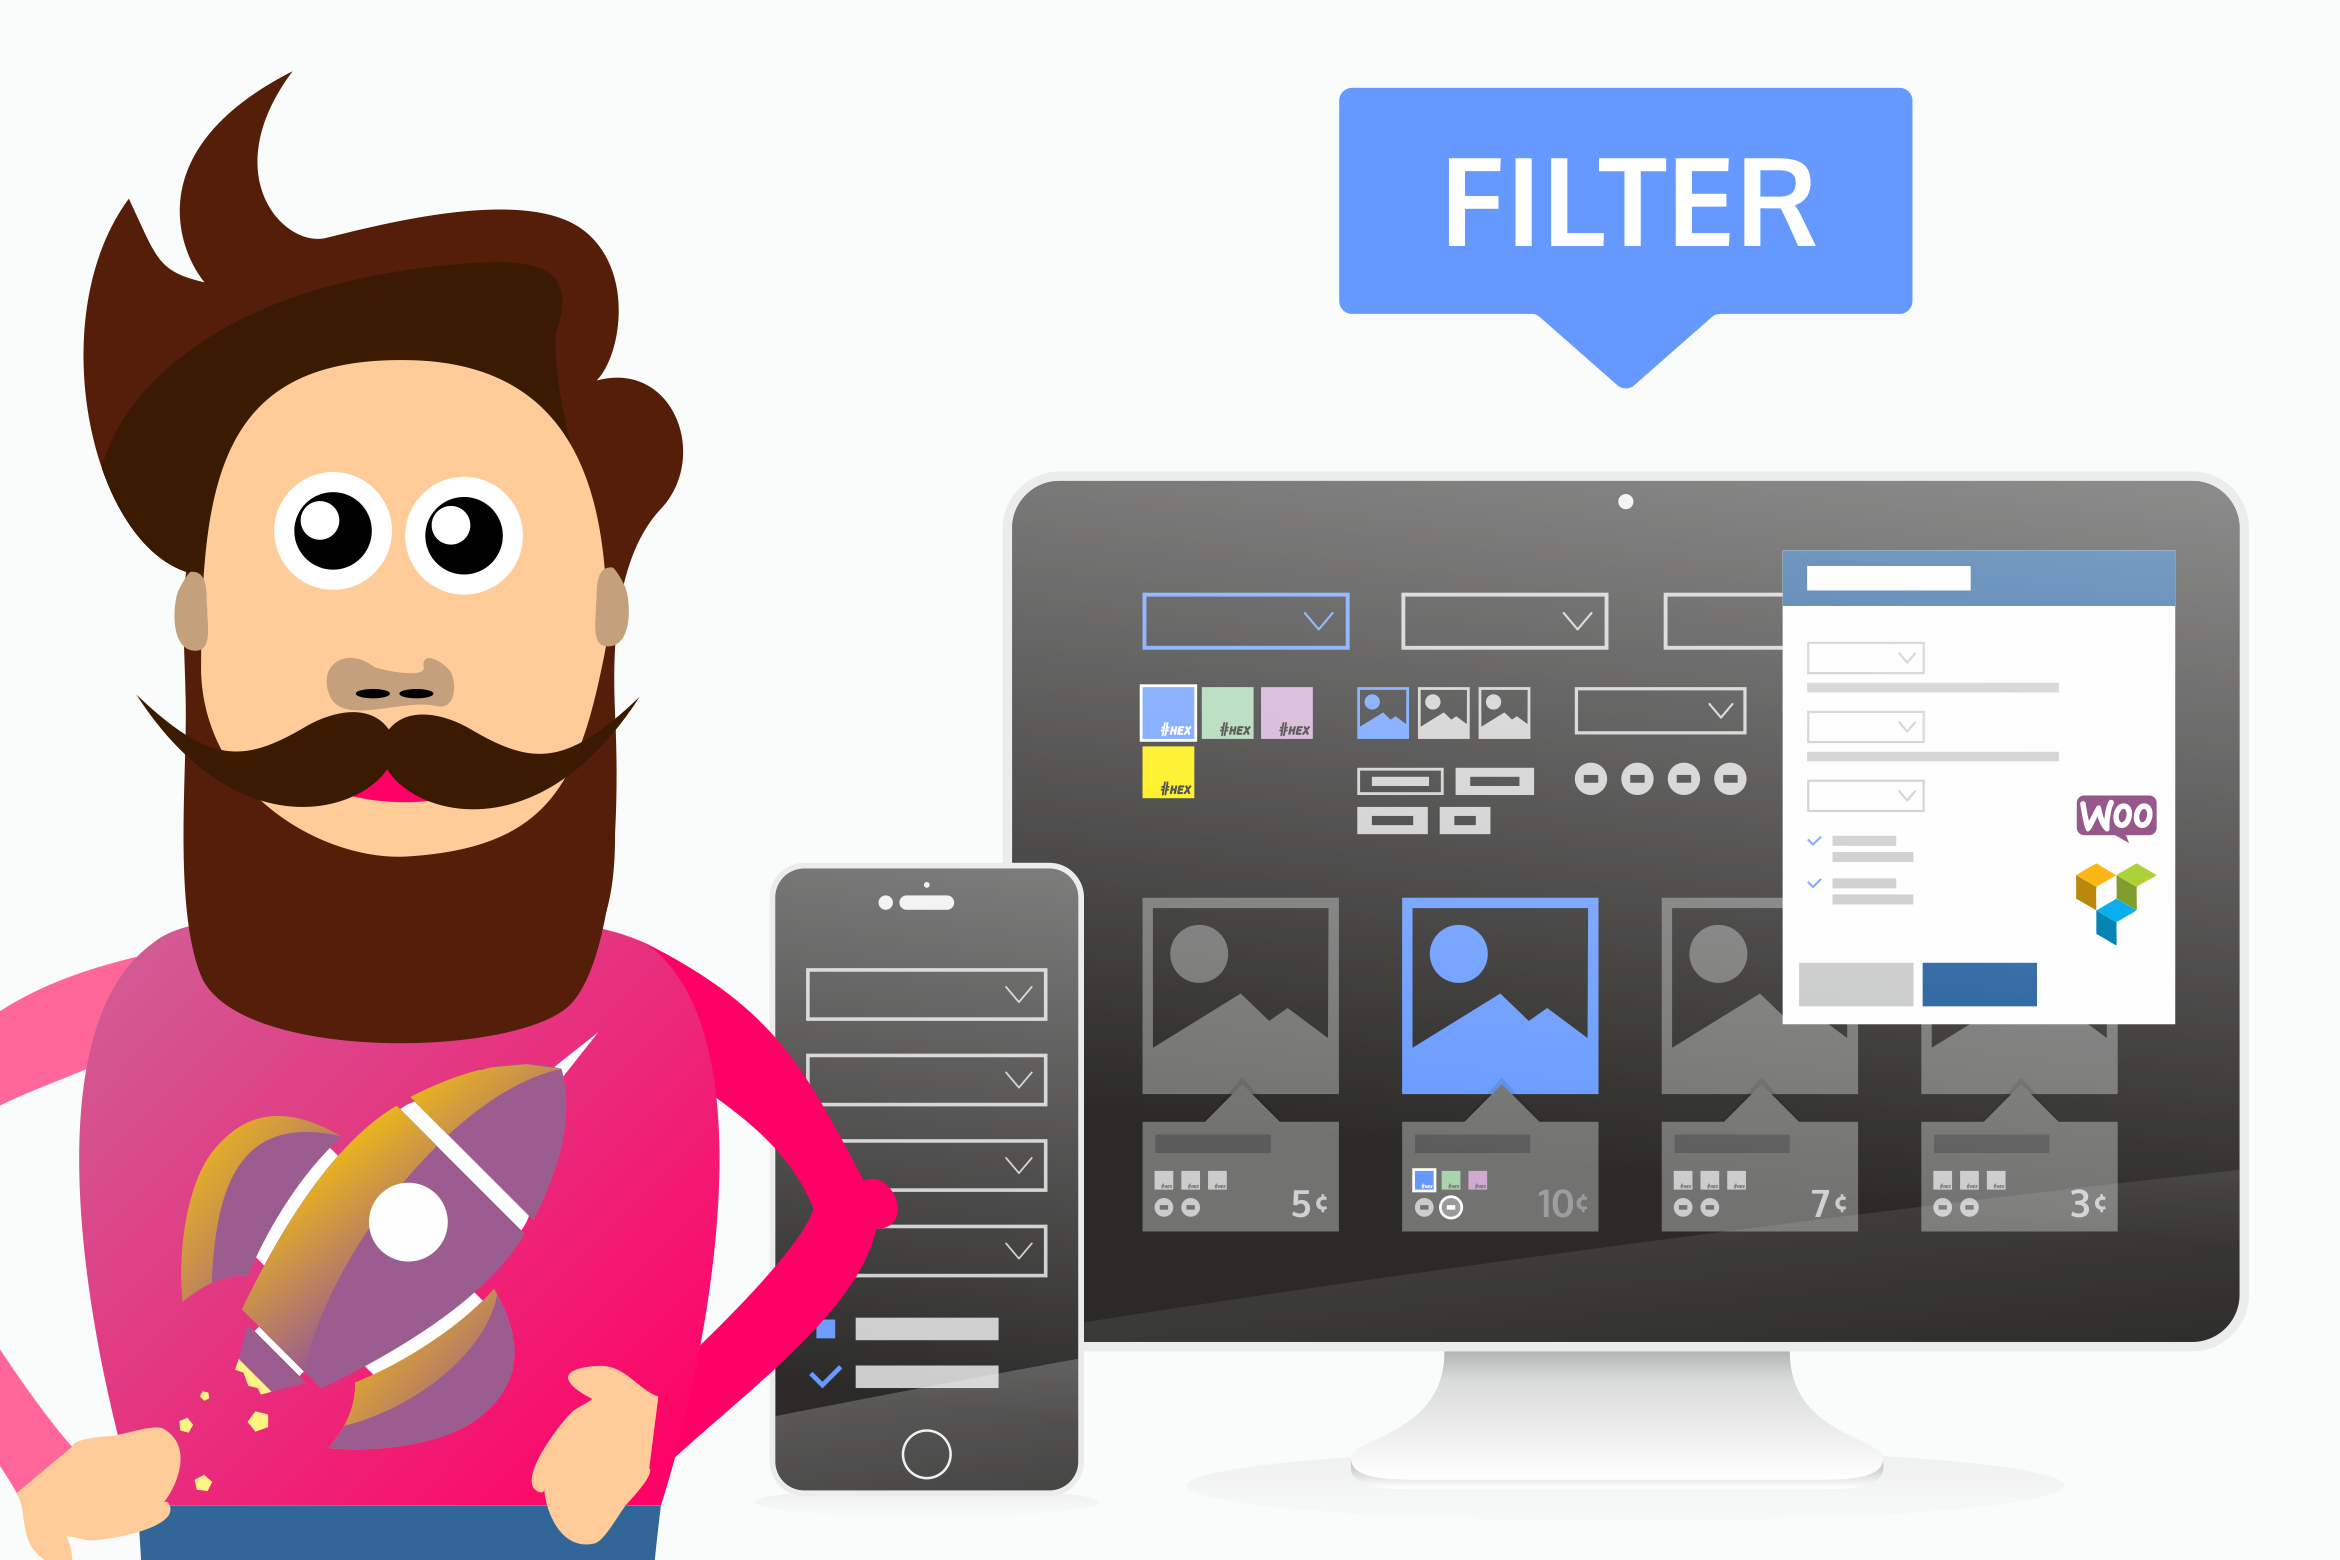 Advanced product options that work with filters and product pages